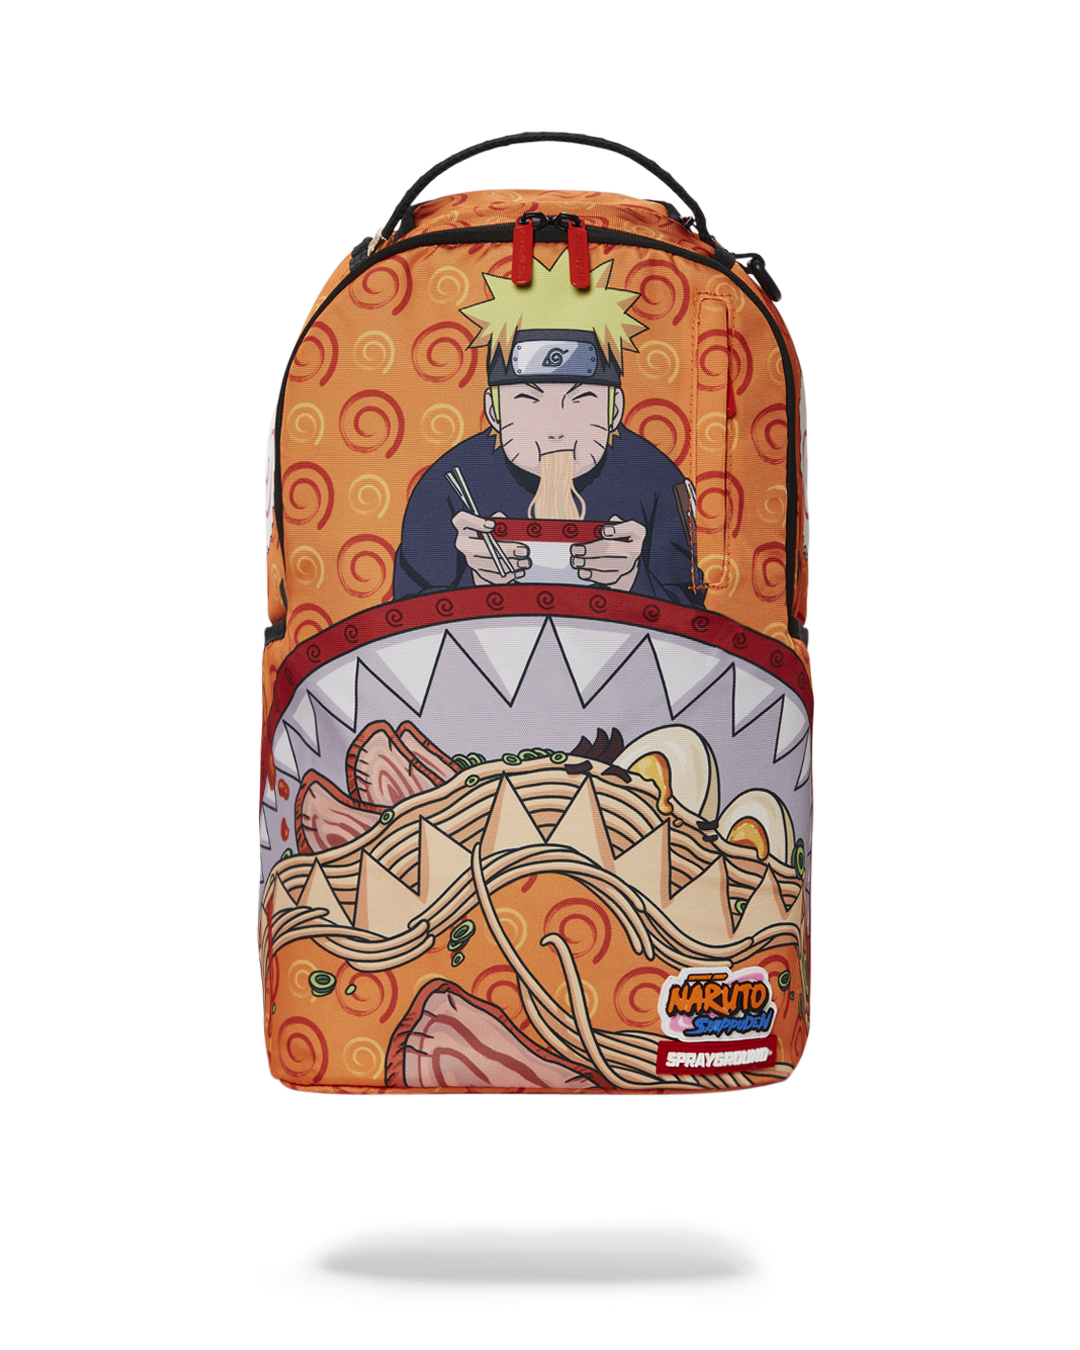  Naruto Weapons ECO 2.0 Backpack, Black, Taille Unique